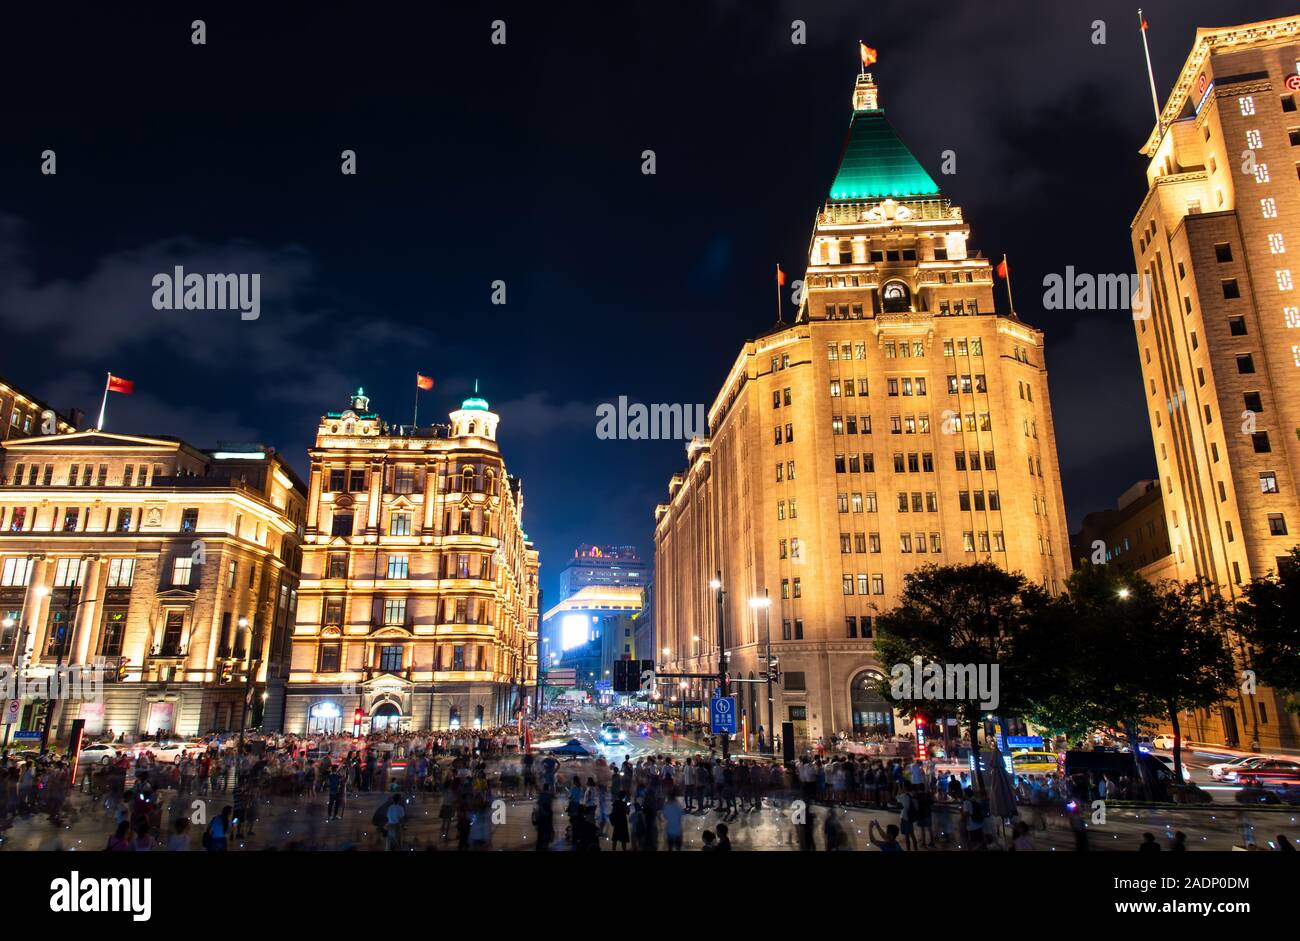 Shanghai, China - August 7, 2019: Busy streets of Shanghai with modern and traditional architecture and tourists walking to the Bund scenic viewpoint Stock Photo